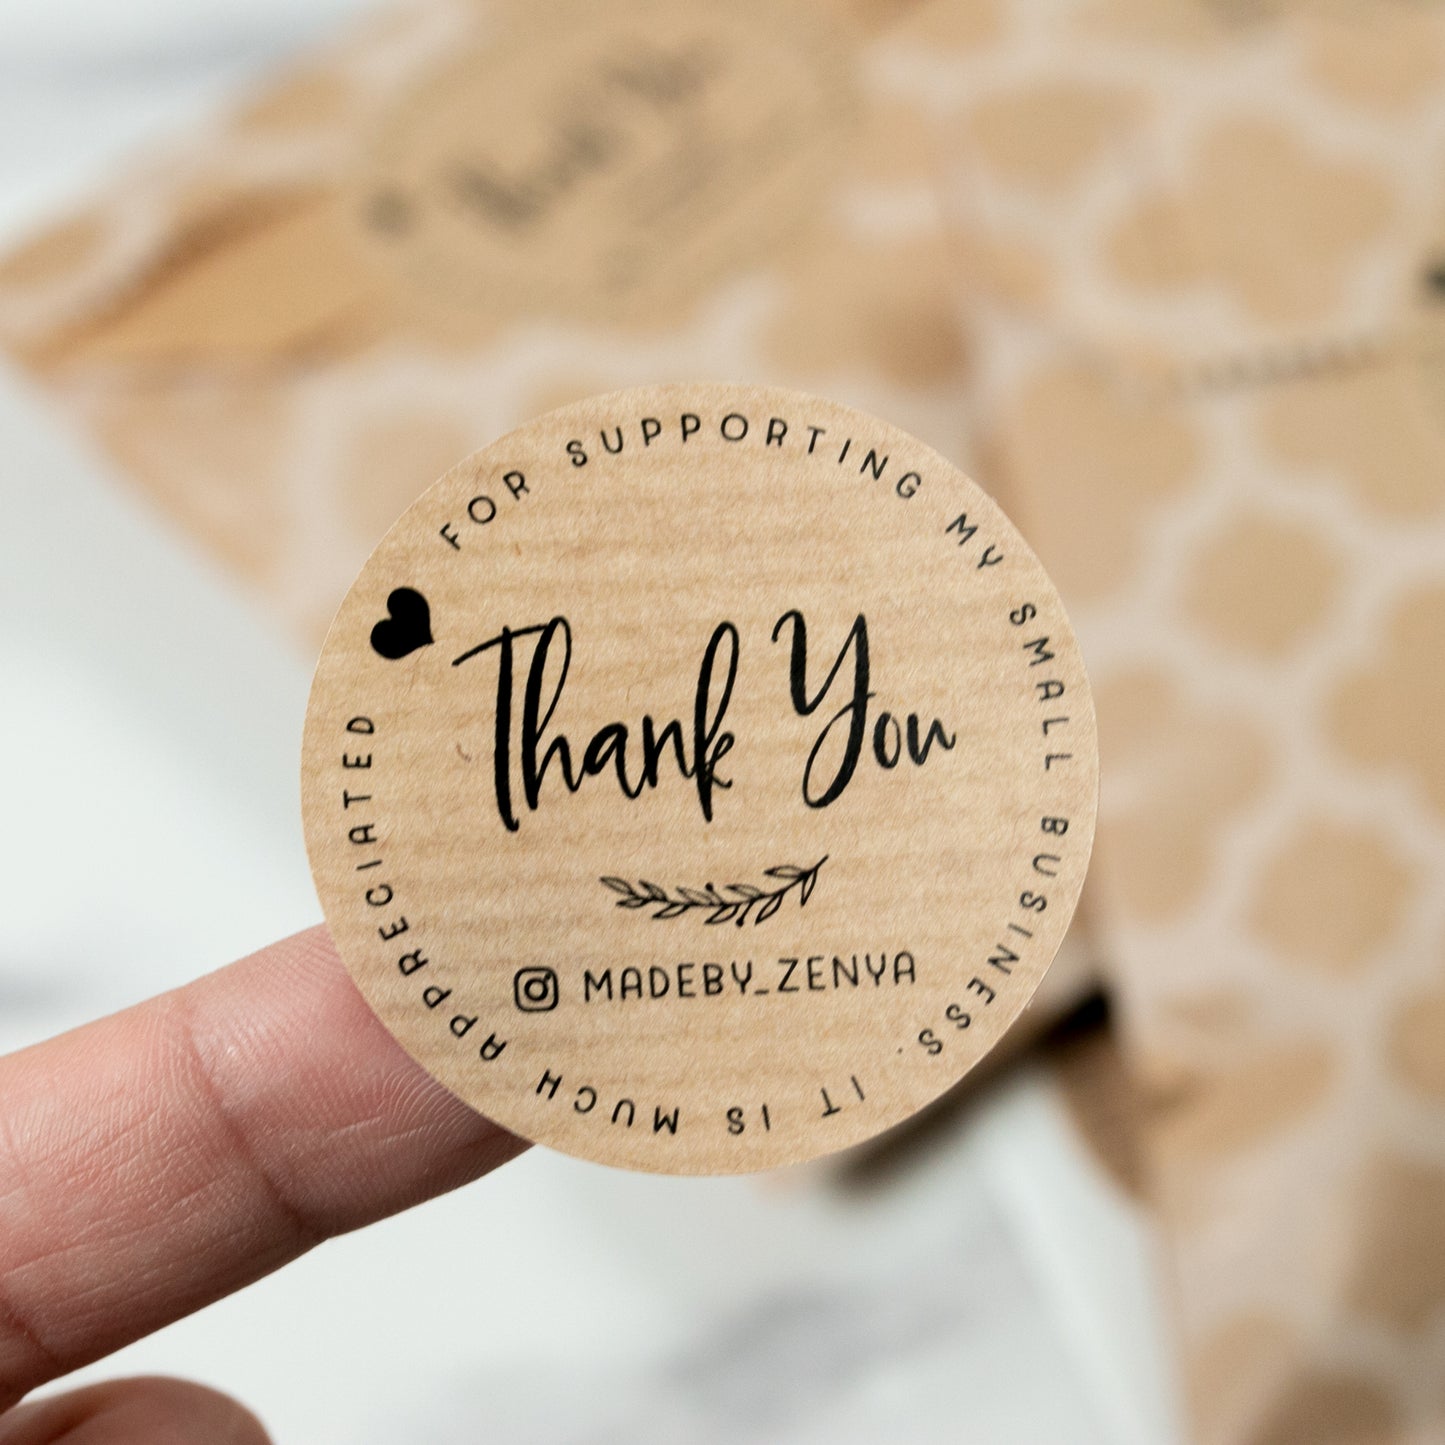 Thank you for supporting my small business stickers- XOXOKristen 